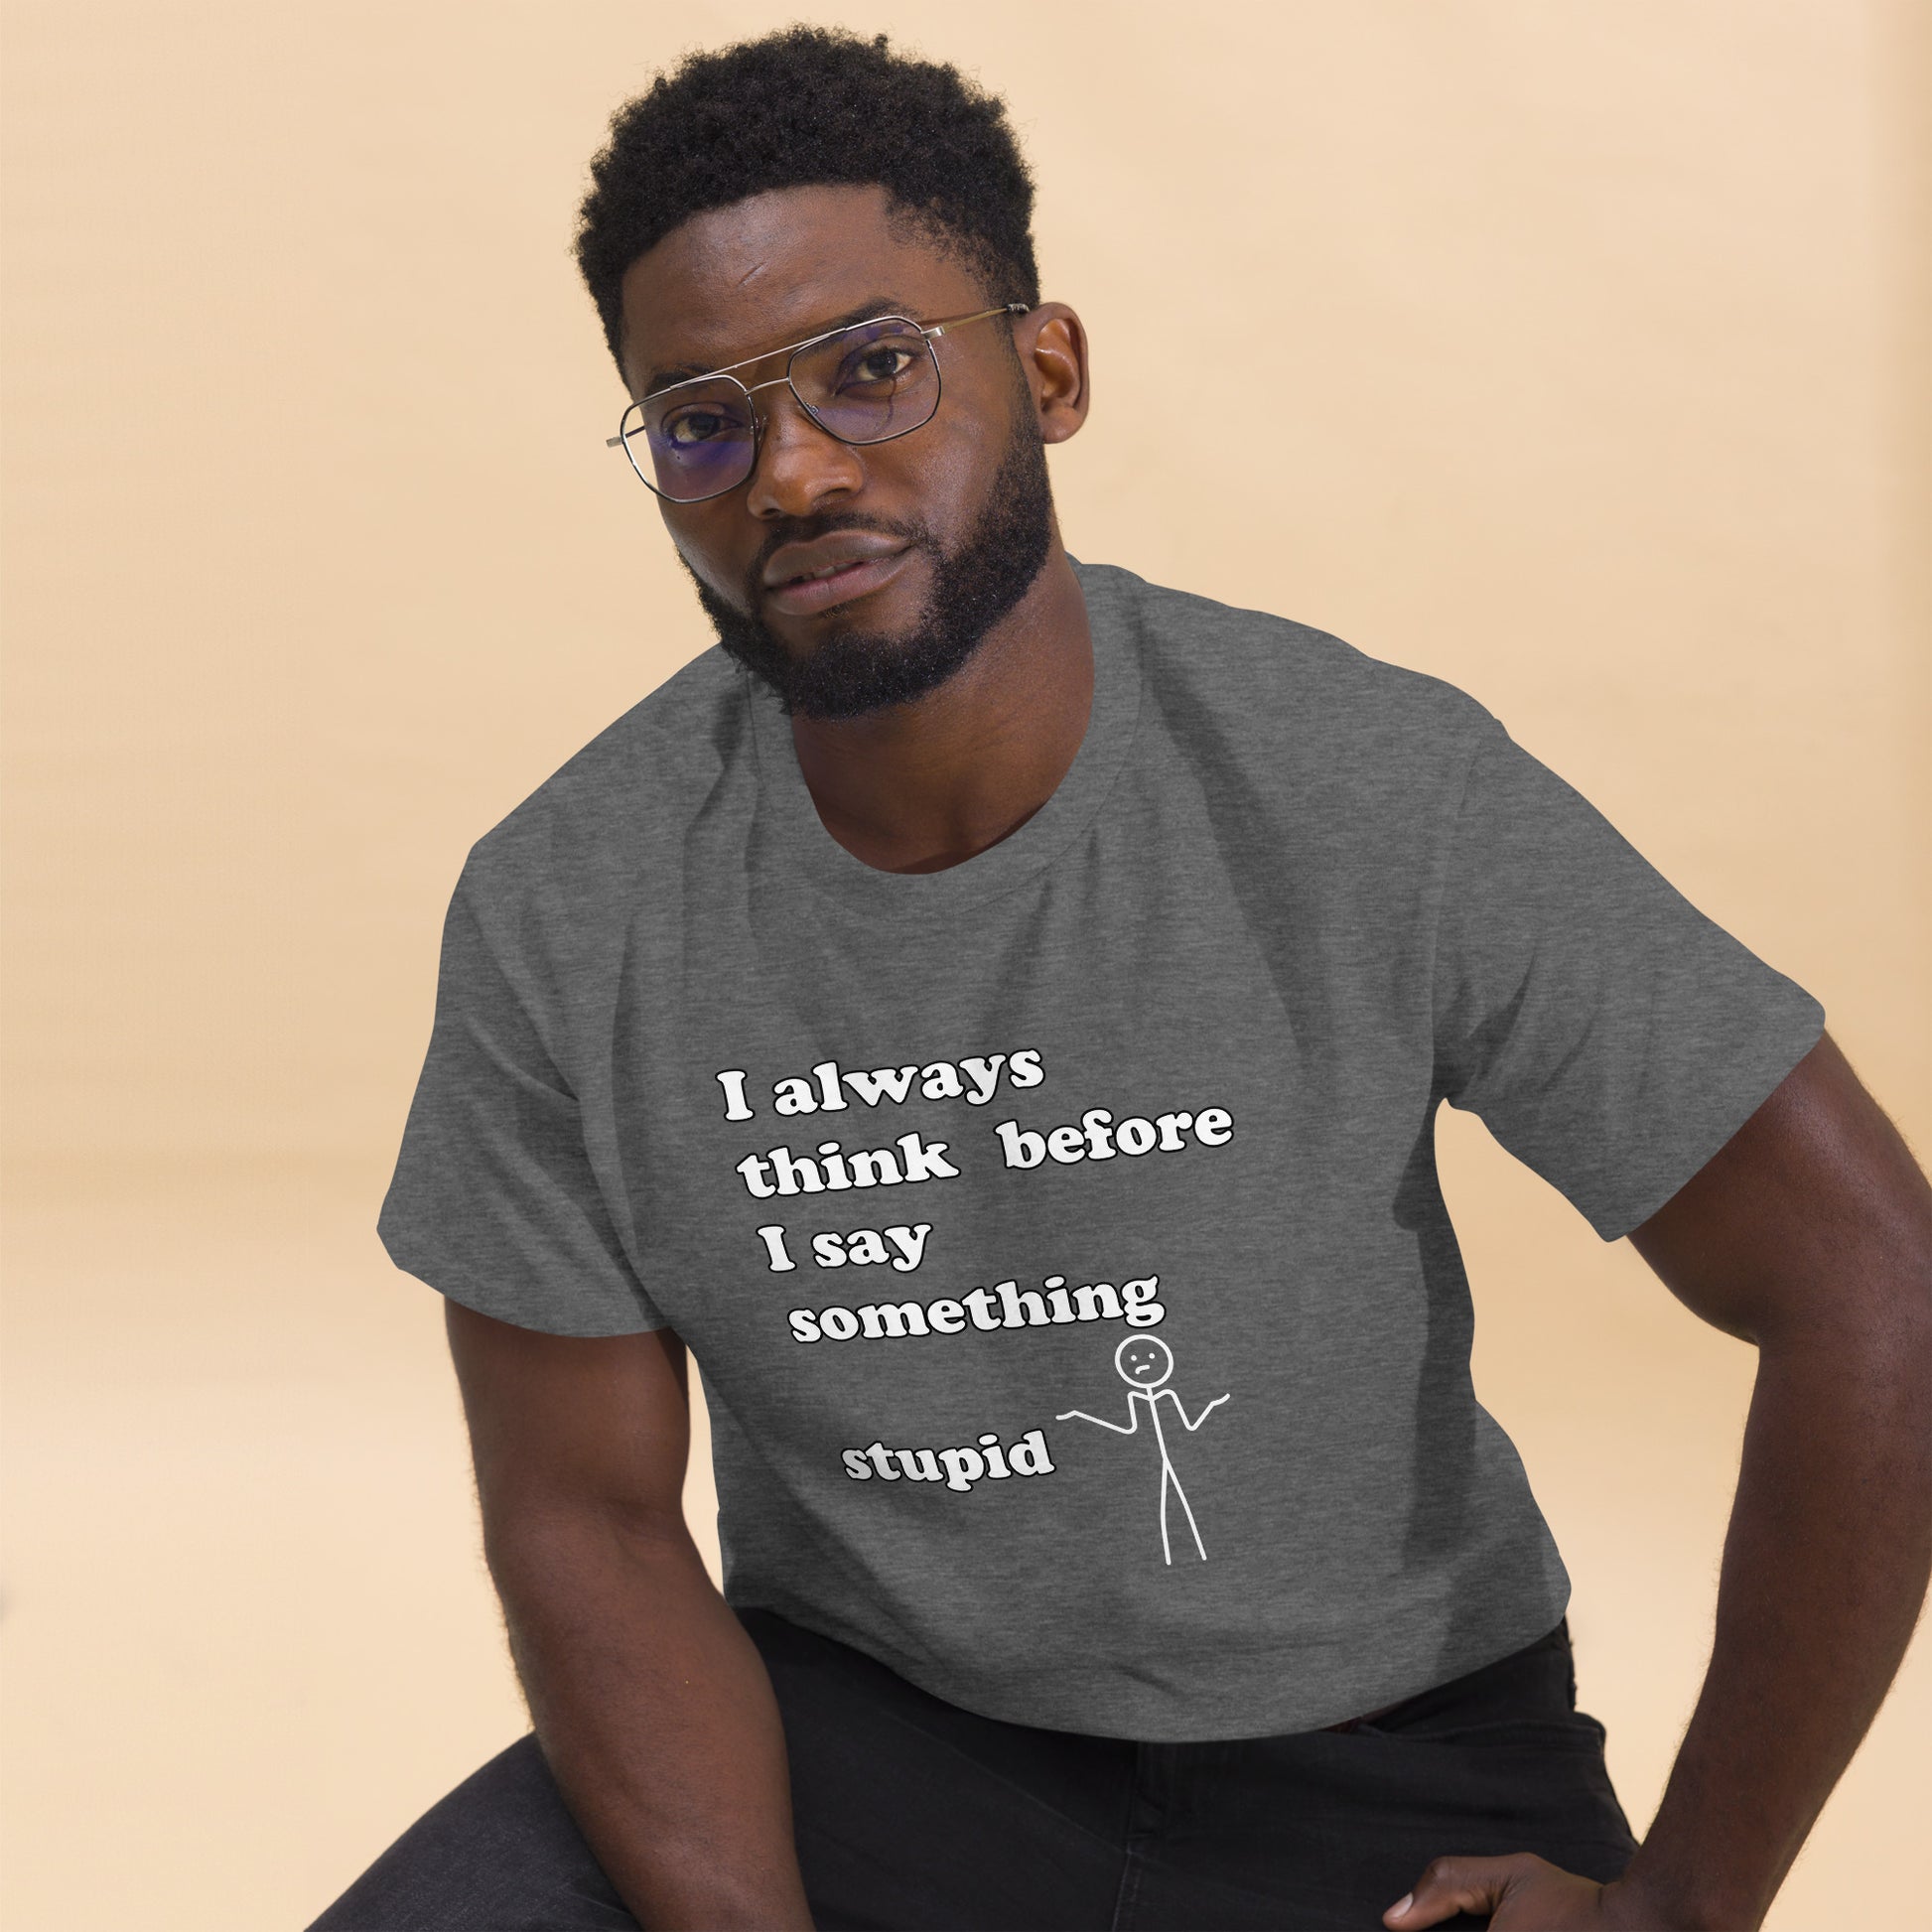 Man with grey t-shirt with text "I always think before I say something stupid"